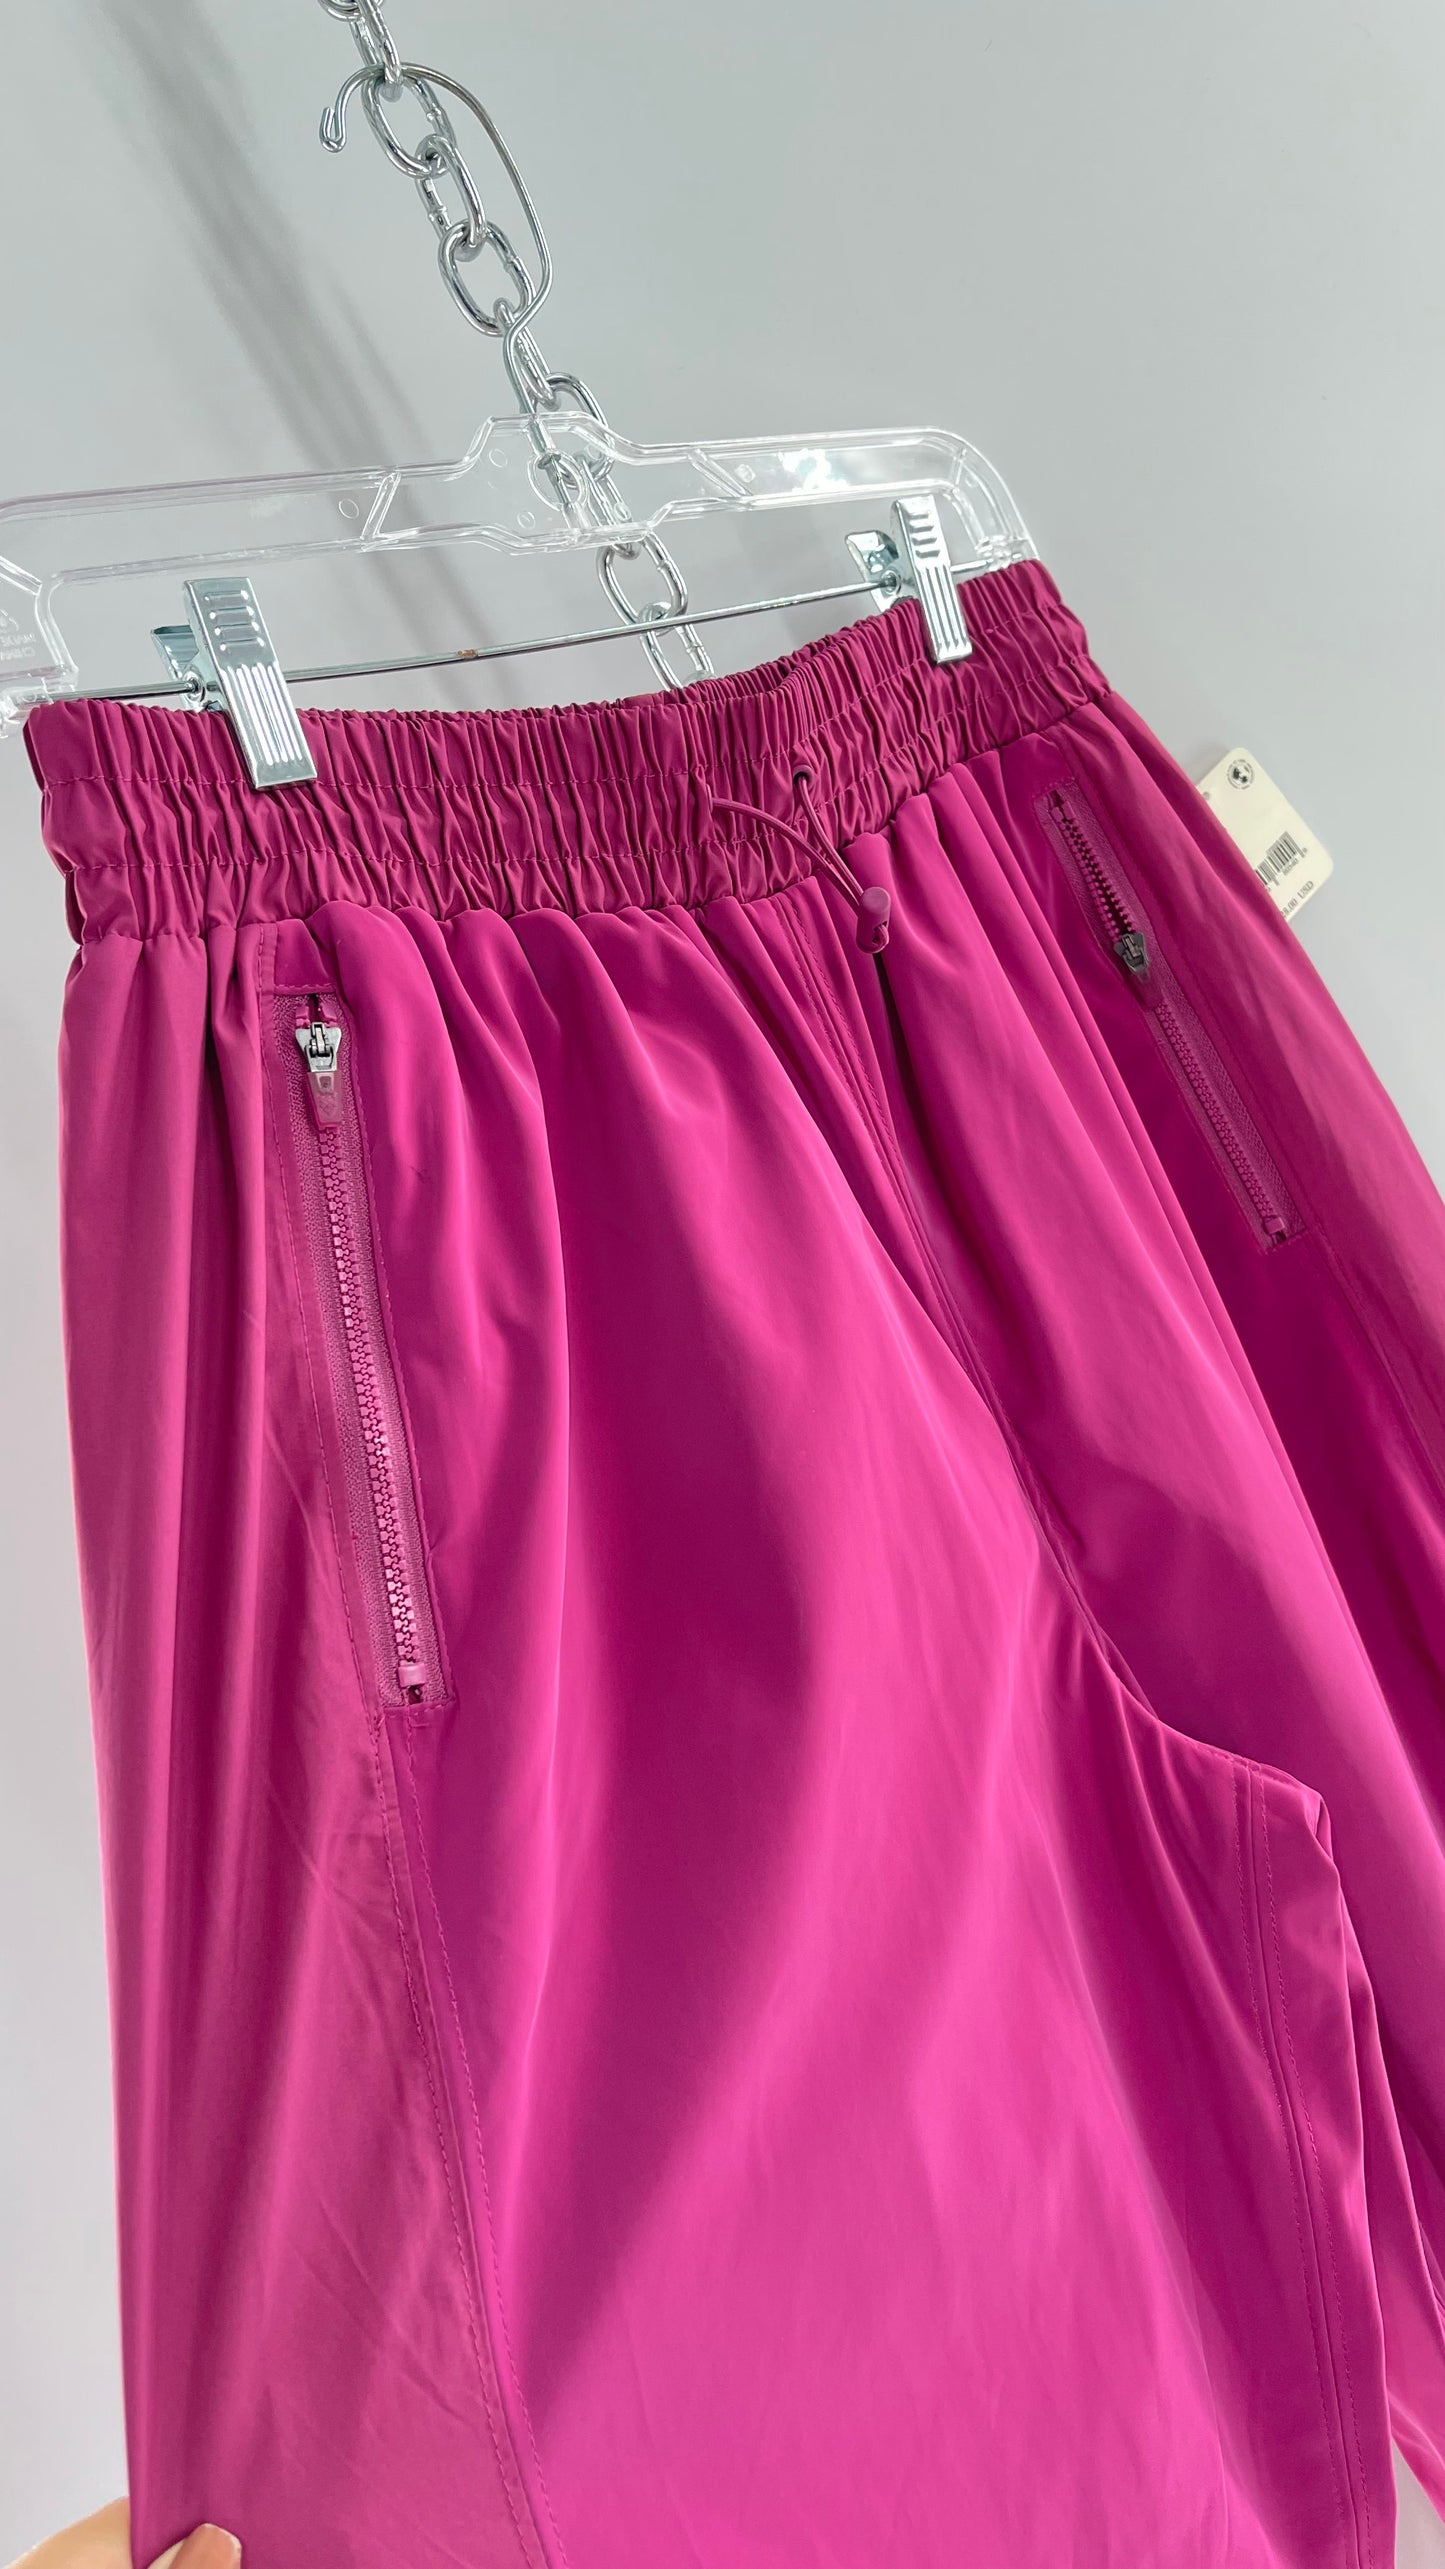 Free People Movement Pink/Purple Workout Track Pants with Tags Attached (Small)